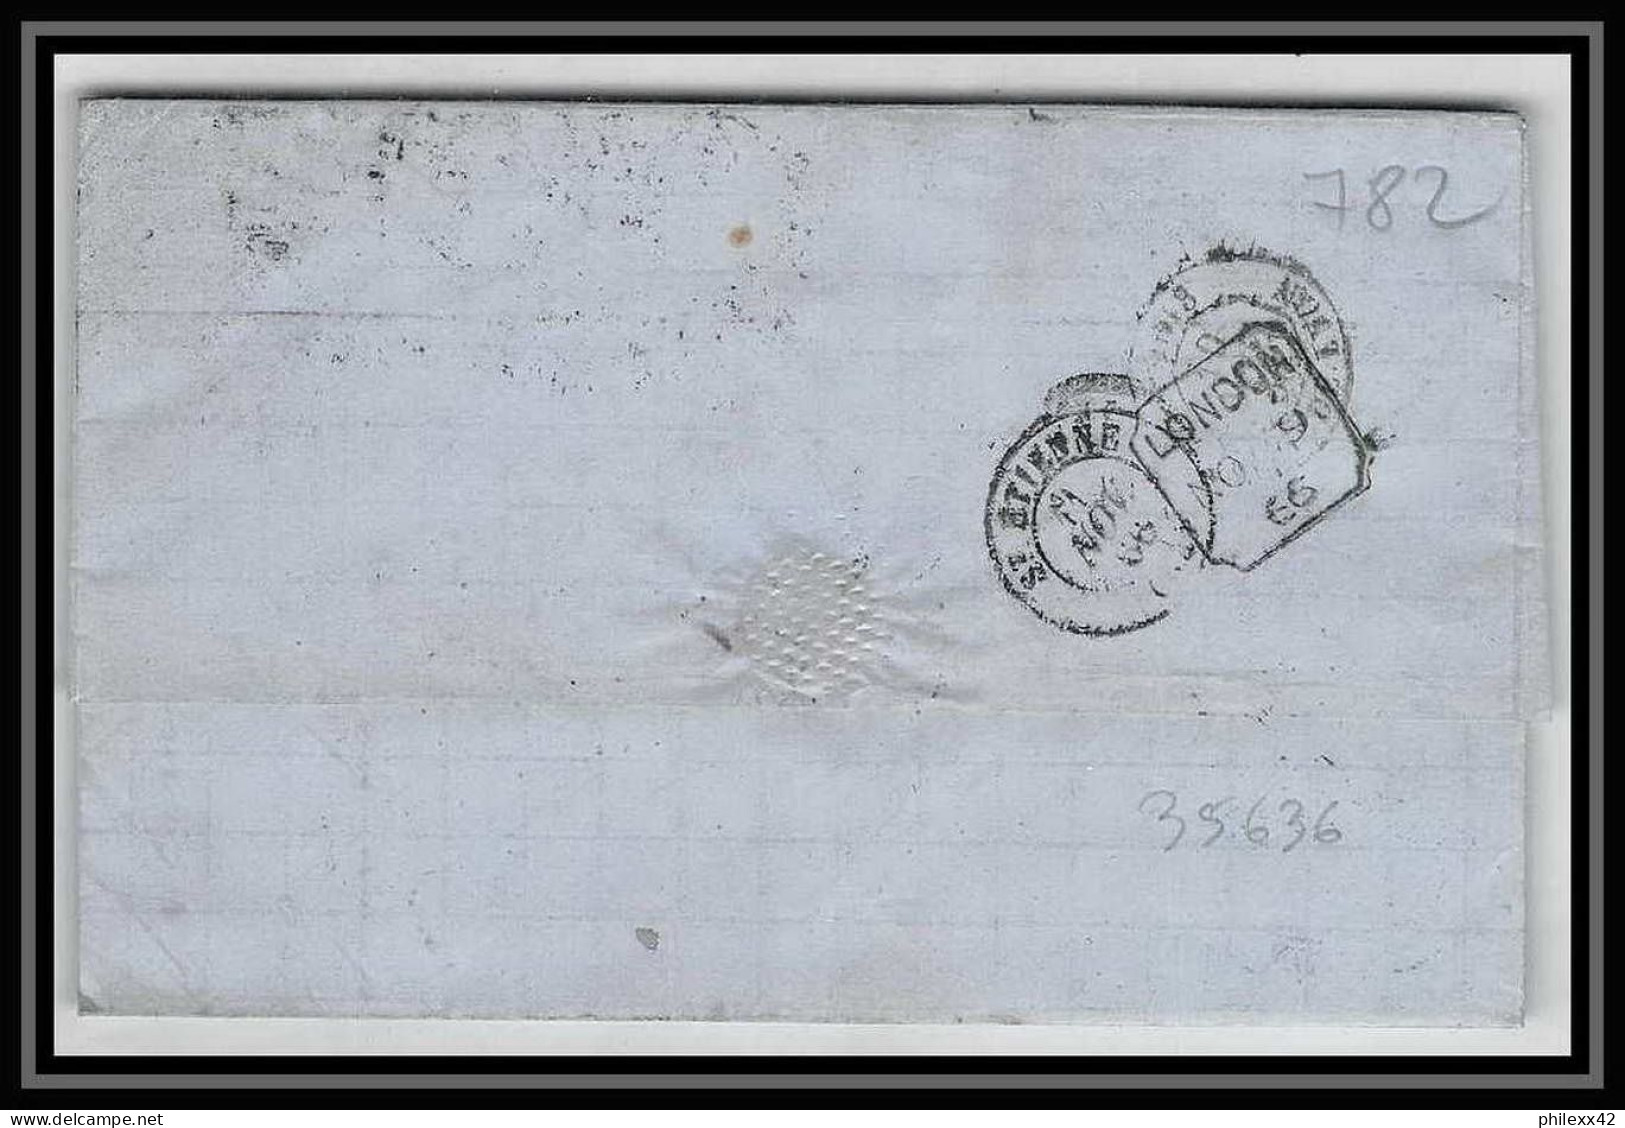 35636 N°32 Victoria 4p Red London St Etienne France 1866 Cachet 46 Lettre Cover Grande Bretagne England - Covers & Documents